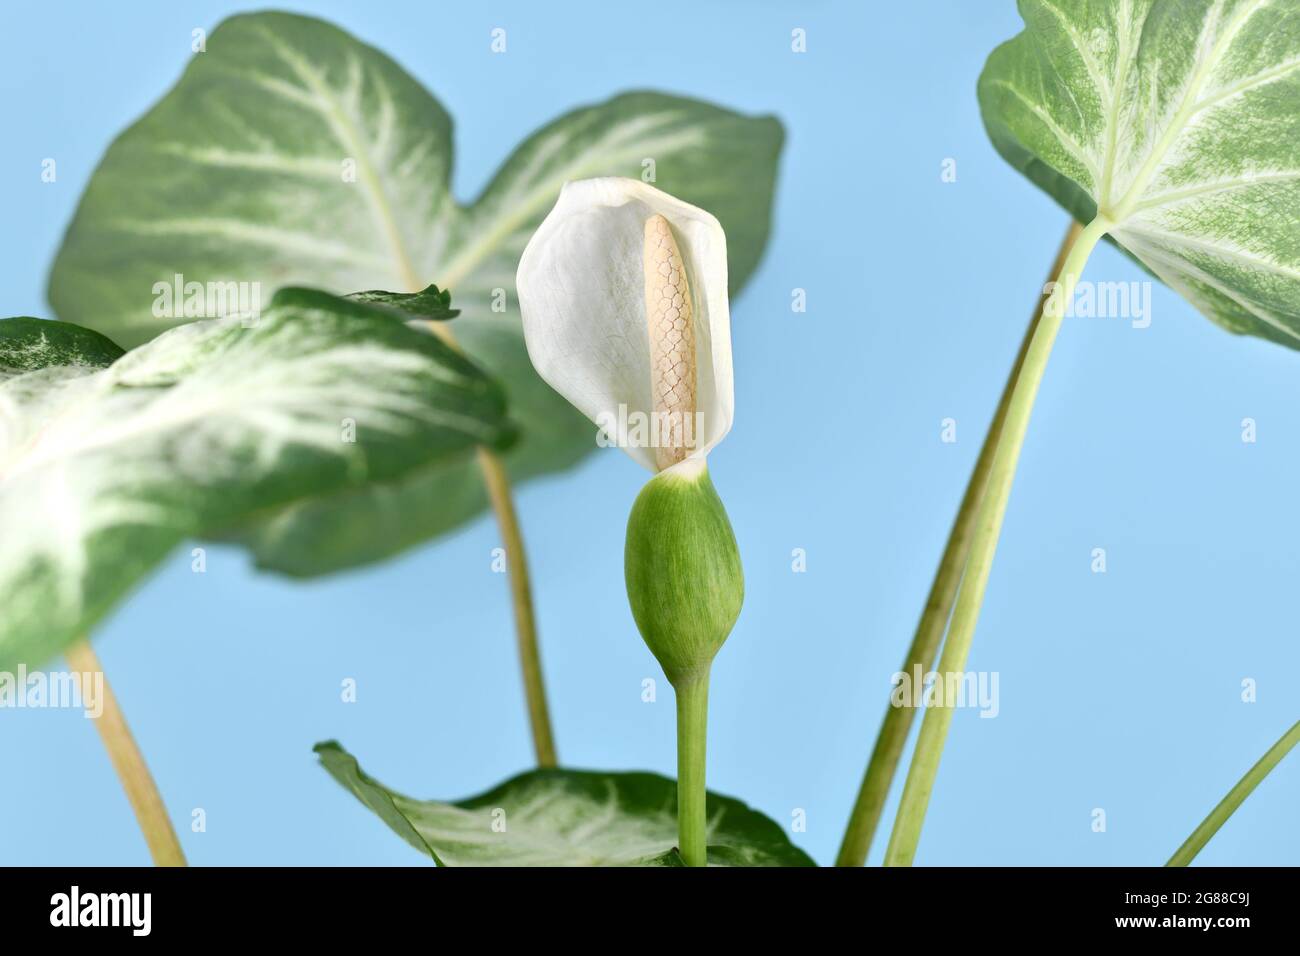 Blooming spadix flower with seeds of exotic 'Caladium Aaron' houseplant on blue background Stock Photo